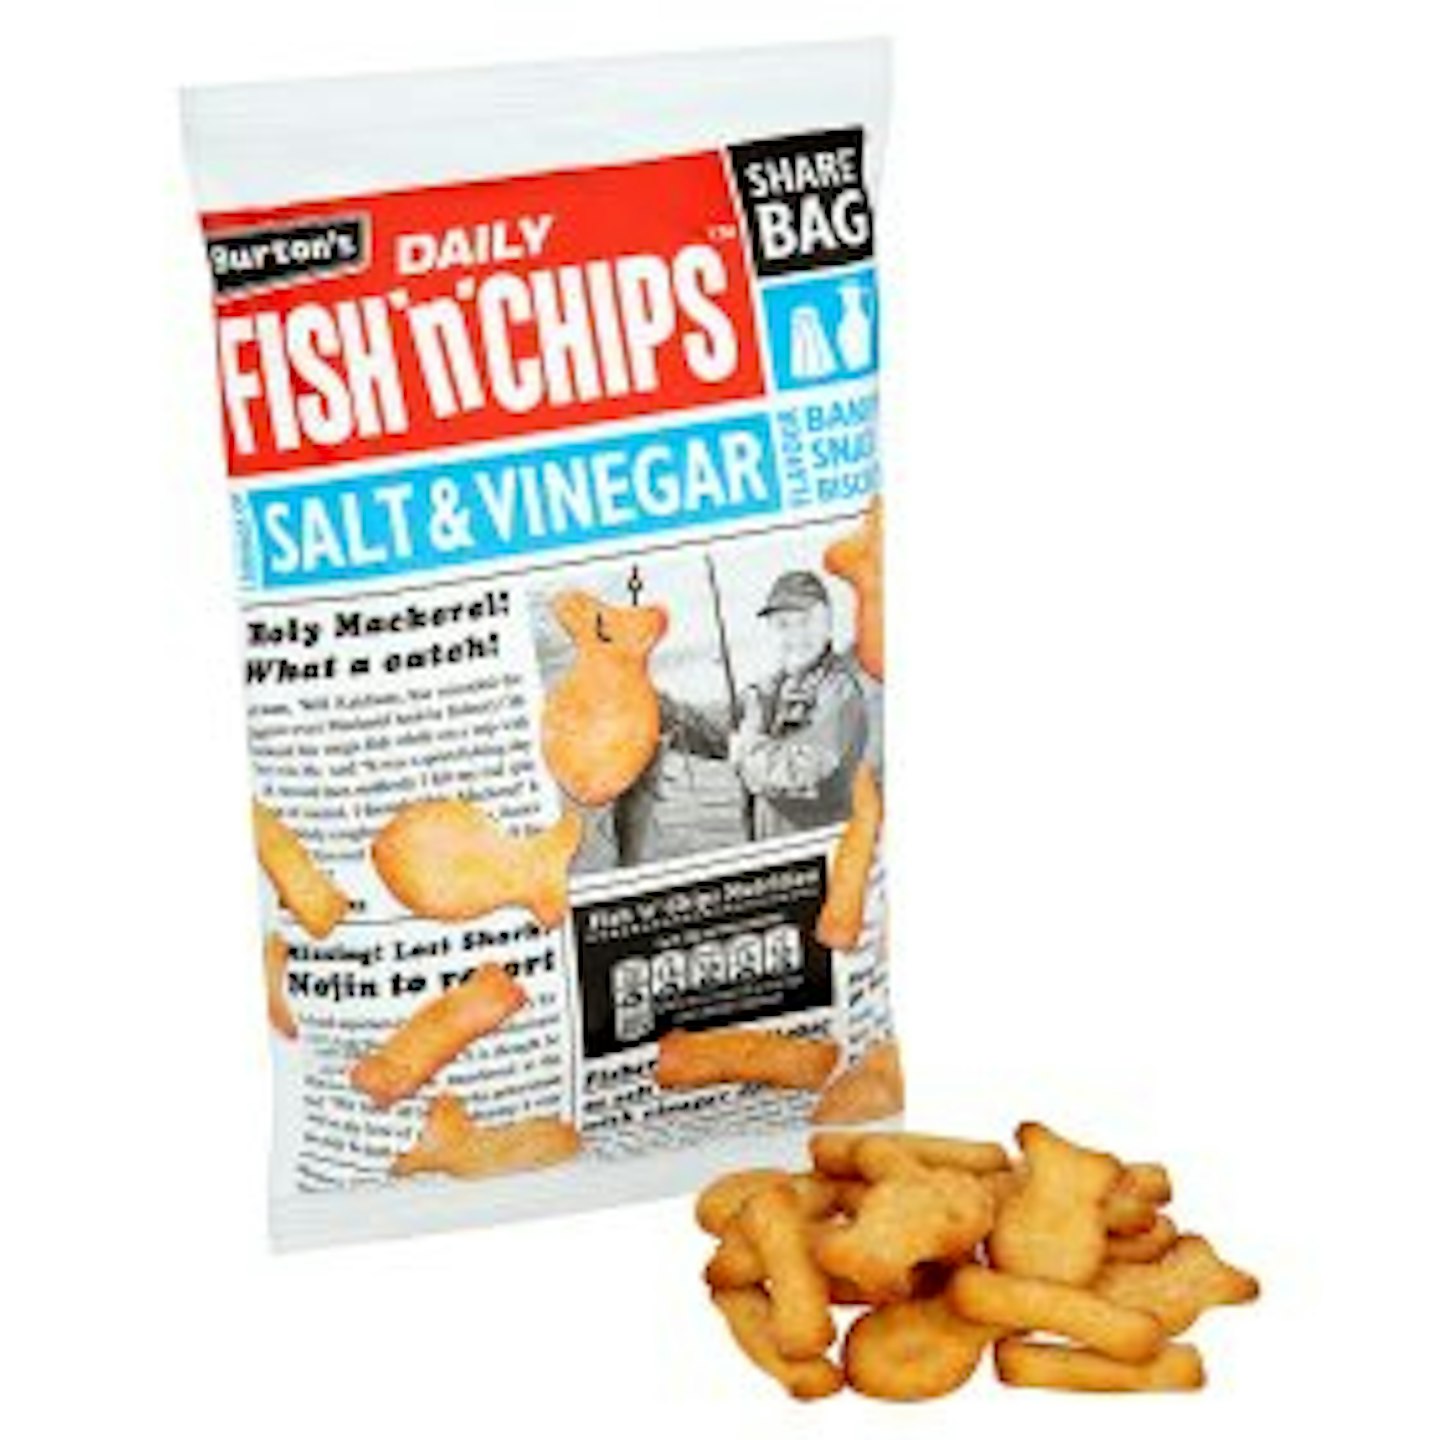 Discontinued crisps Fish n Chips